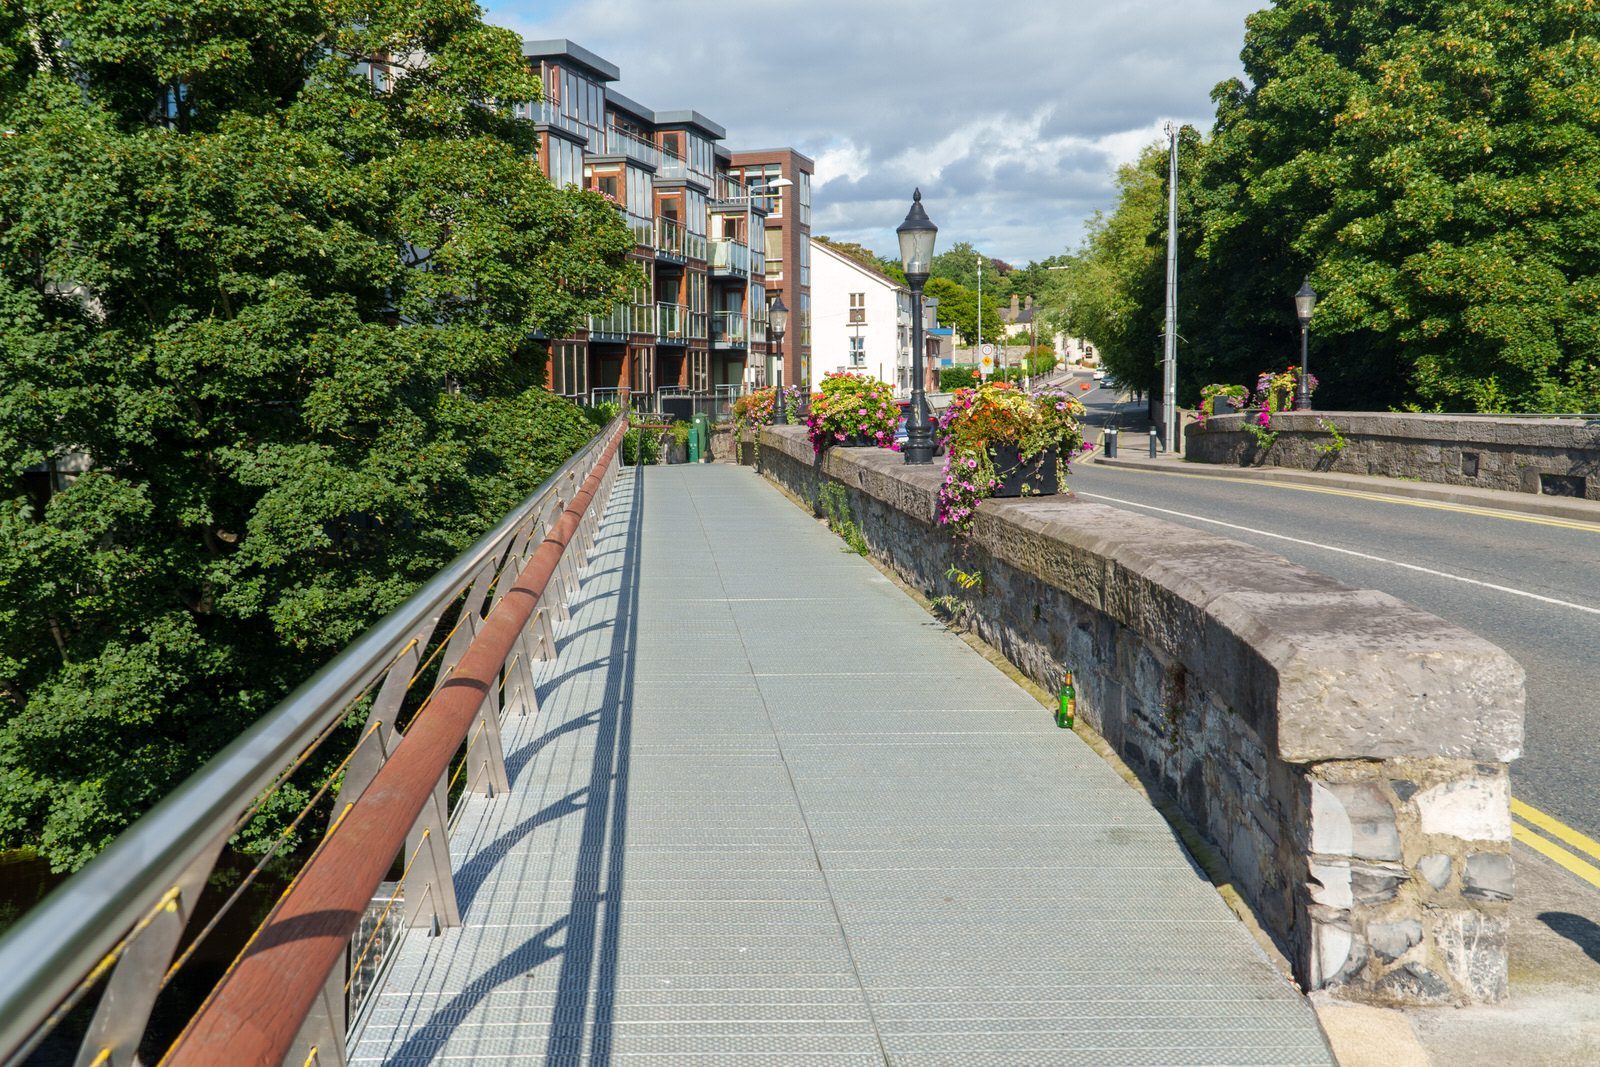 THE ANNA LIVIA BRIDGE IN CHAPELIZOD [IT WAS BUILT IN THE 1660s AND NAMED THE CHAPELIZOD BRIDGE] 015